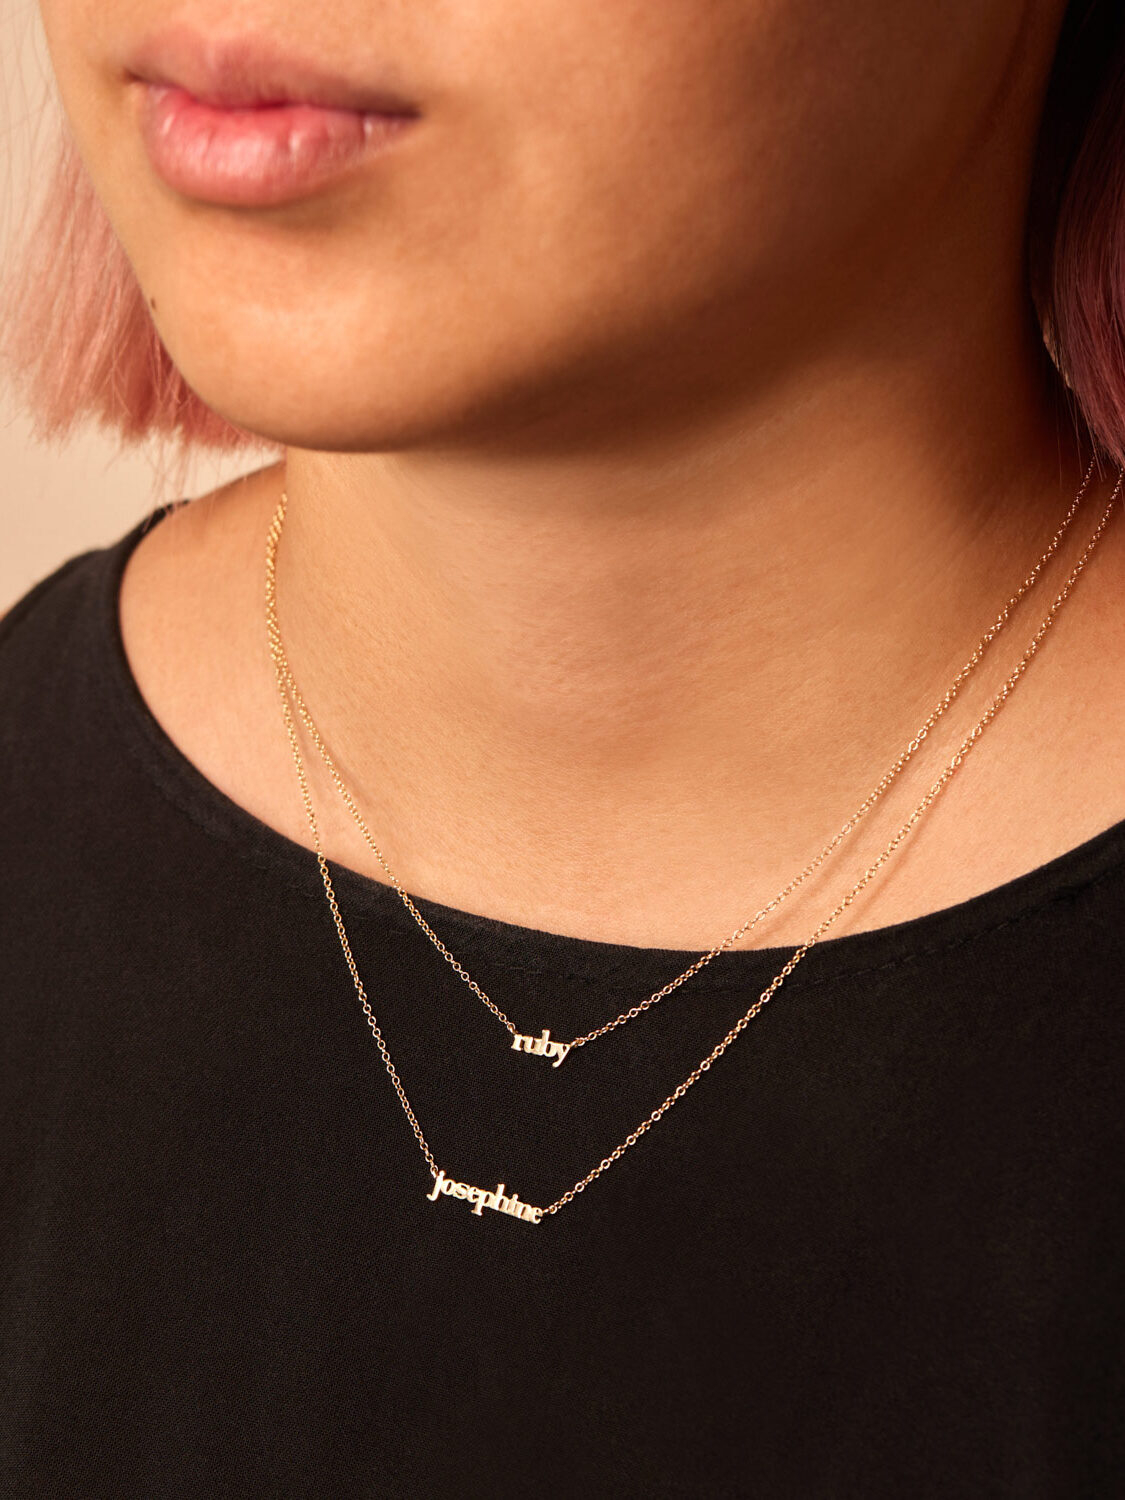 A close up shot of a model wearing two name necklaces in gold by Catbird.